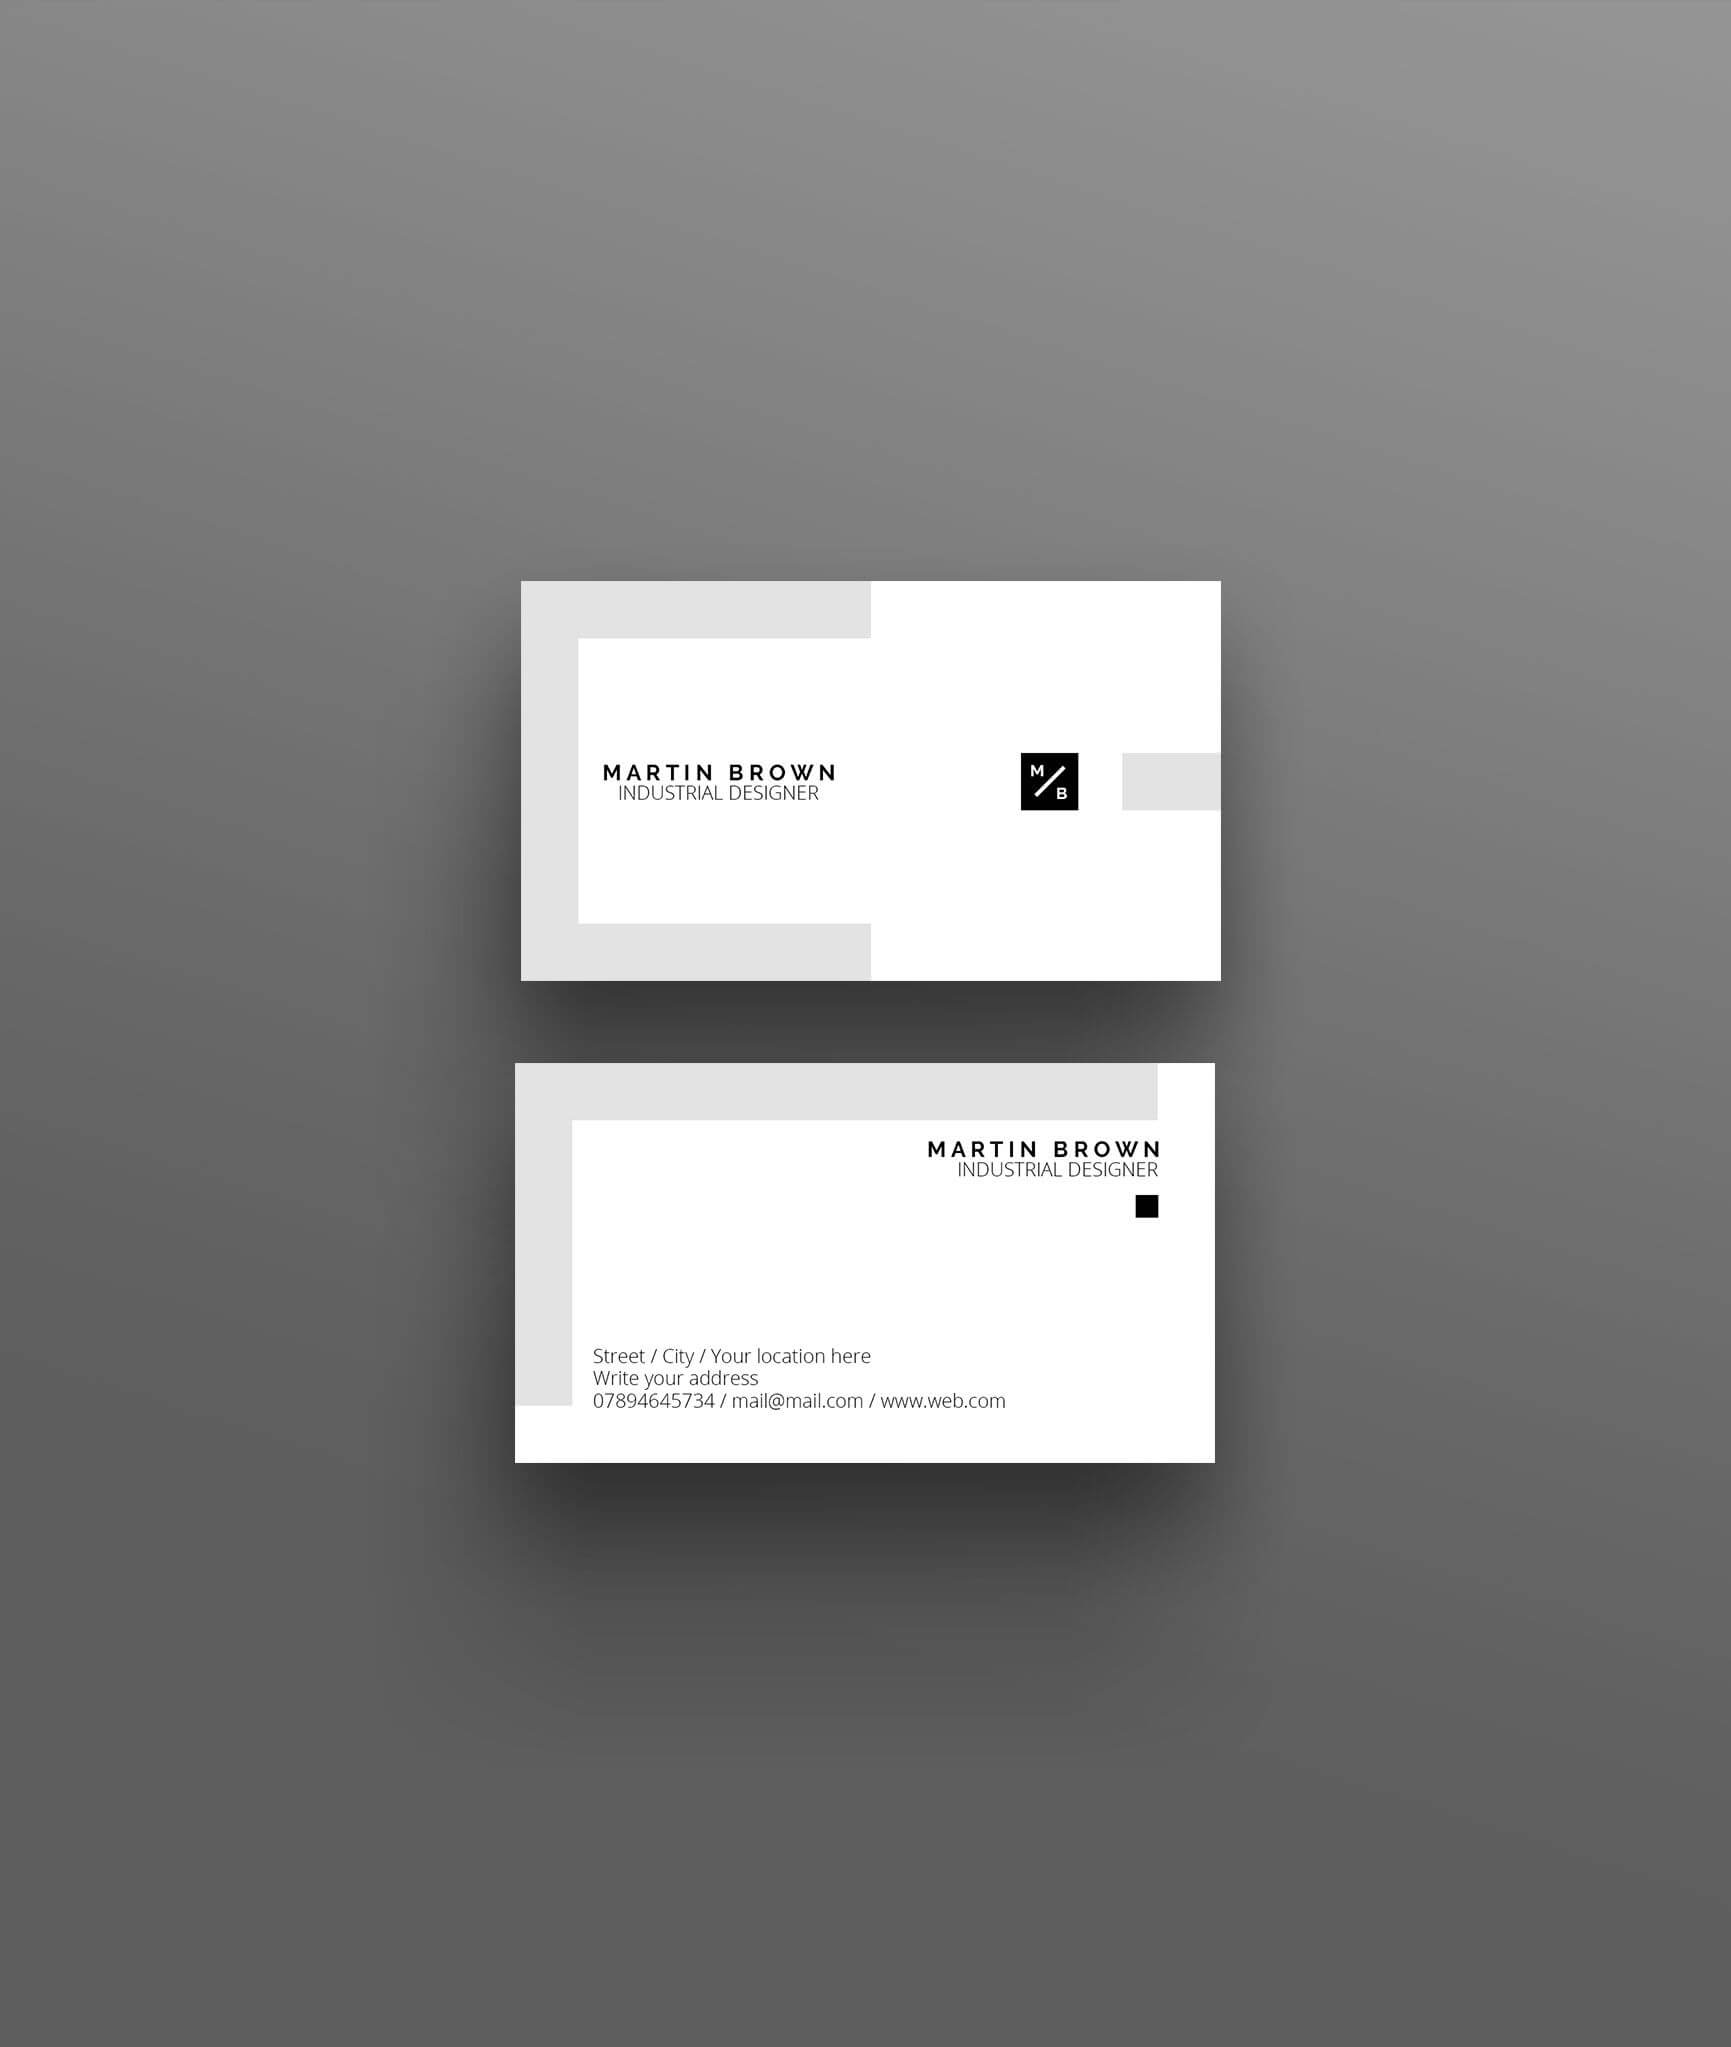 Business Card Template For Adobe Photoshop / Psd File Inside Name Card Template Photoshop